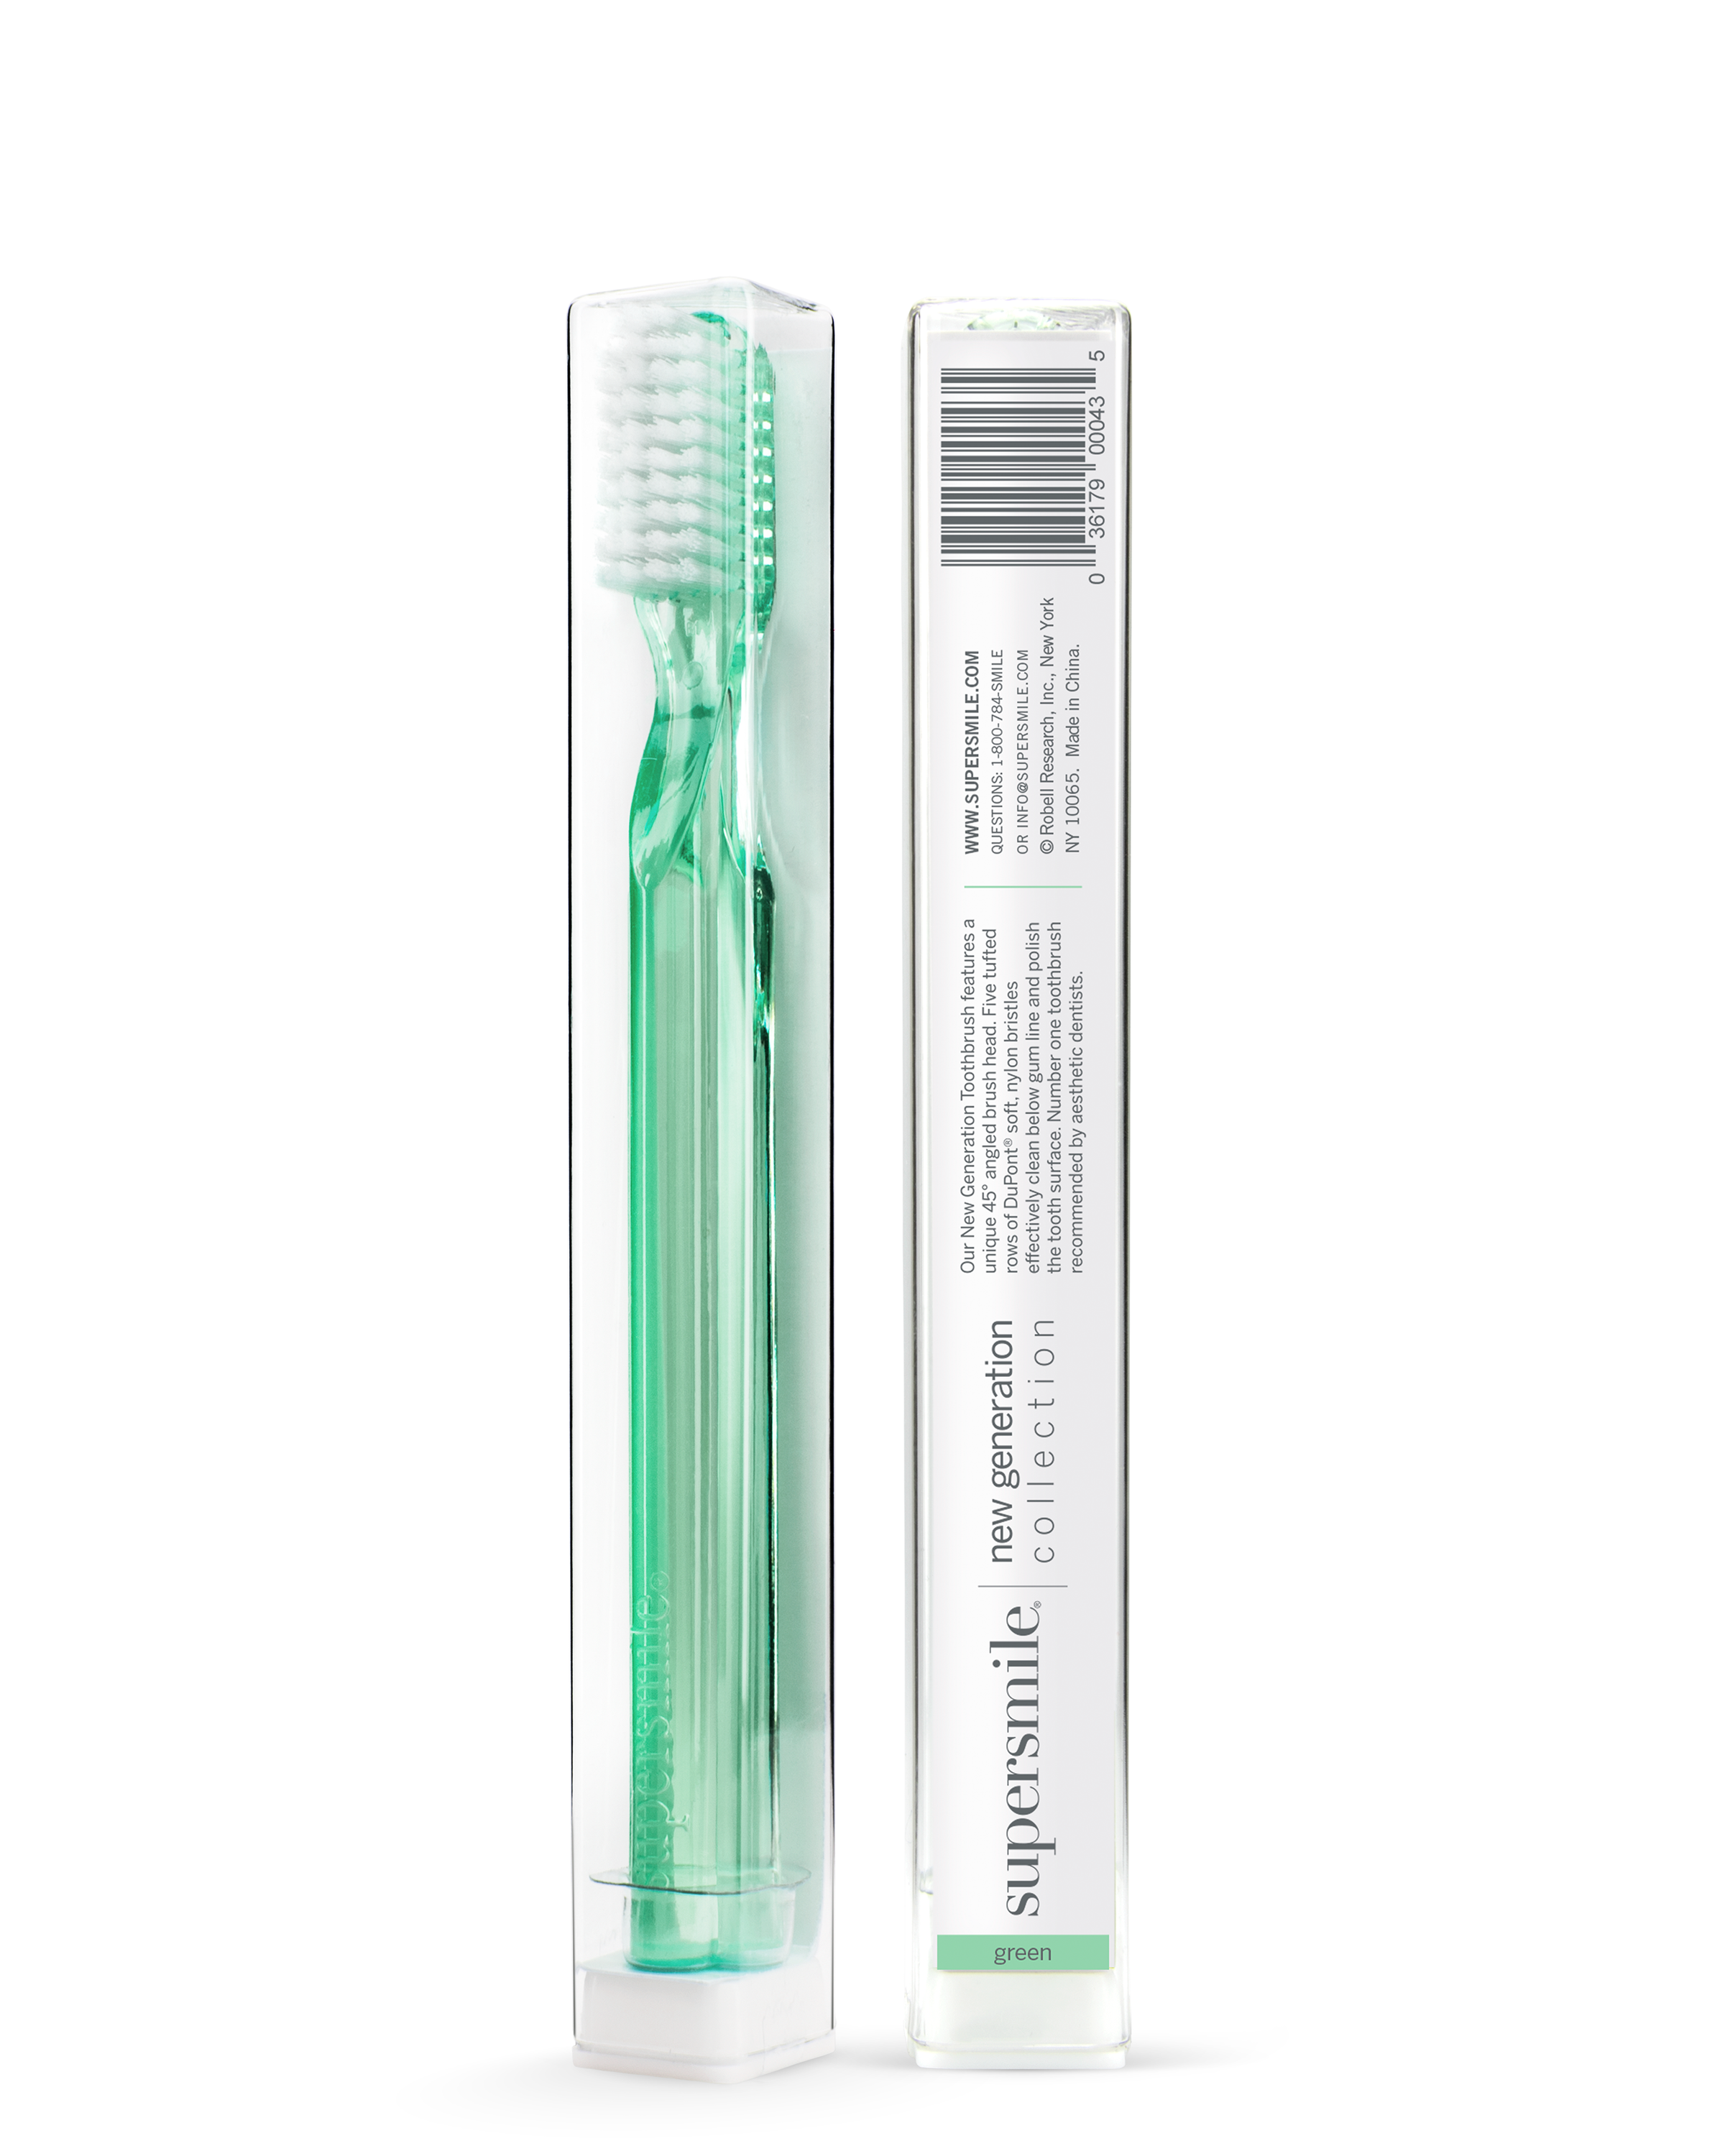 new generation 45° toothbrushes